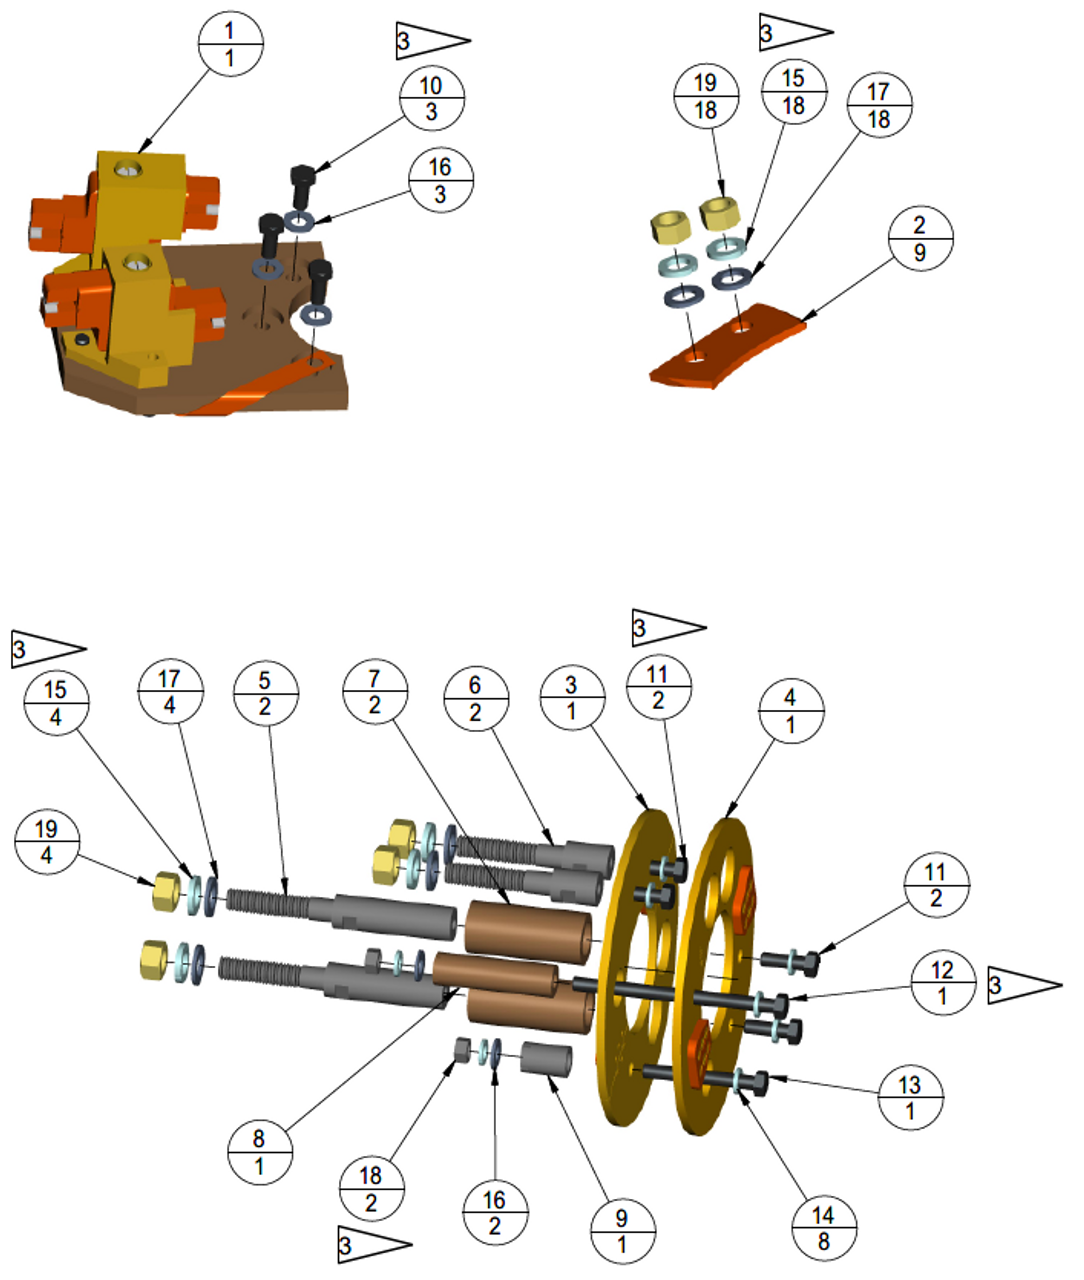 3D model of parts in the contact kit